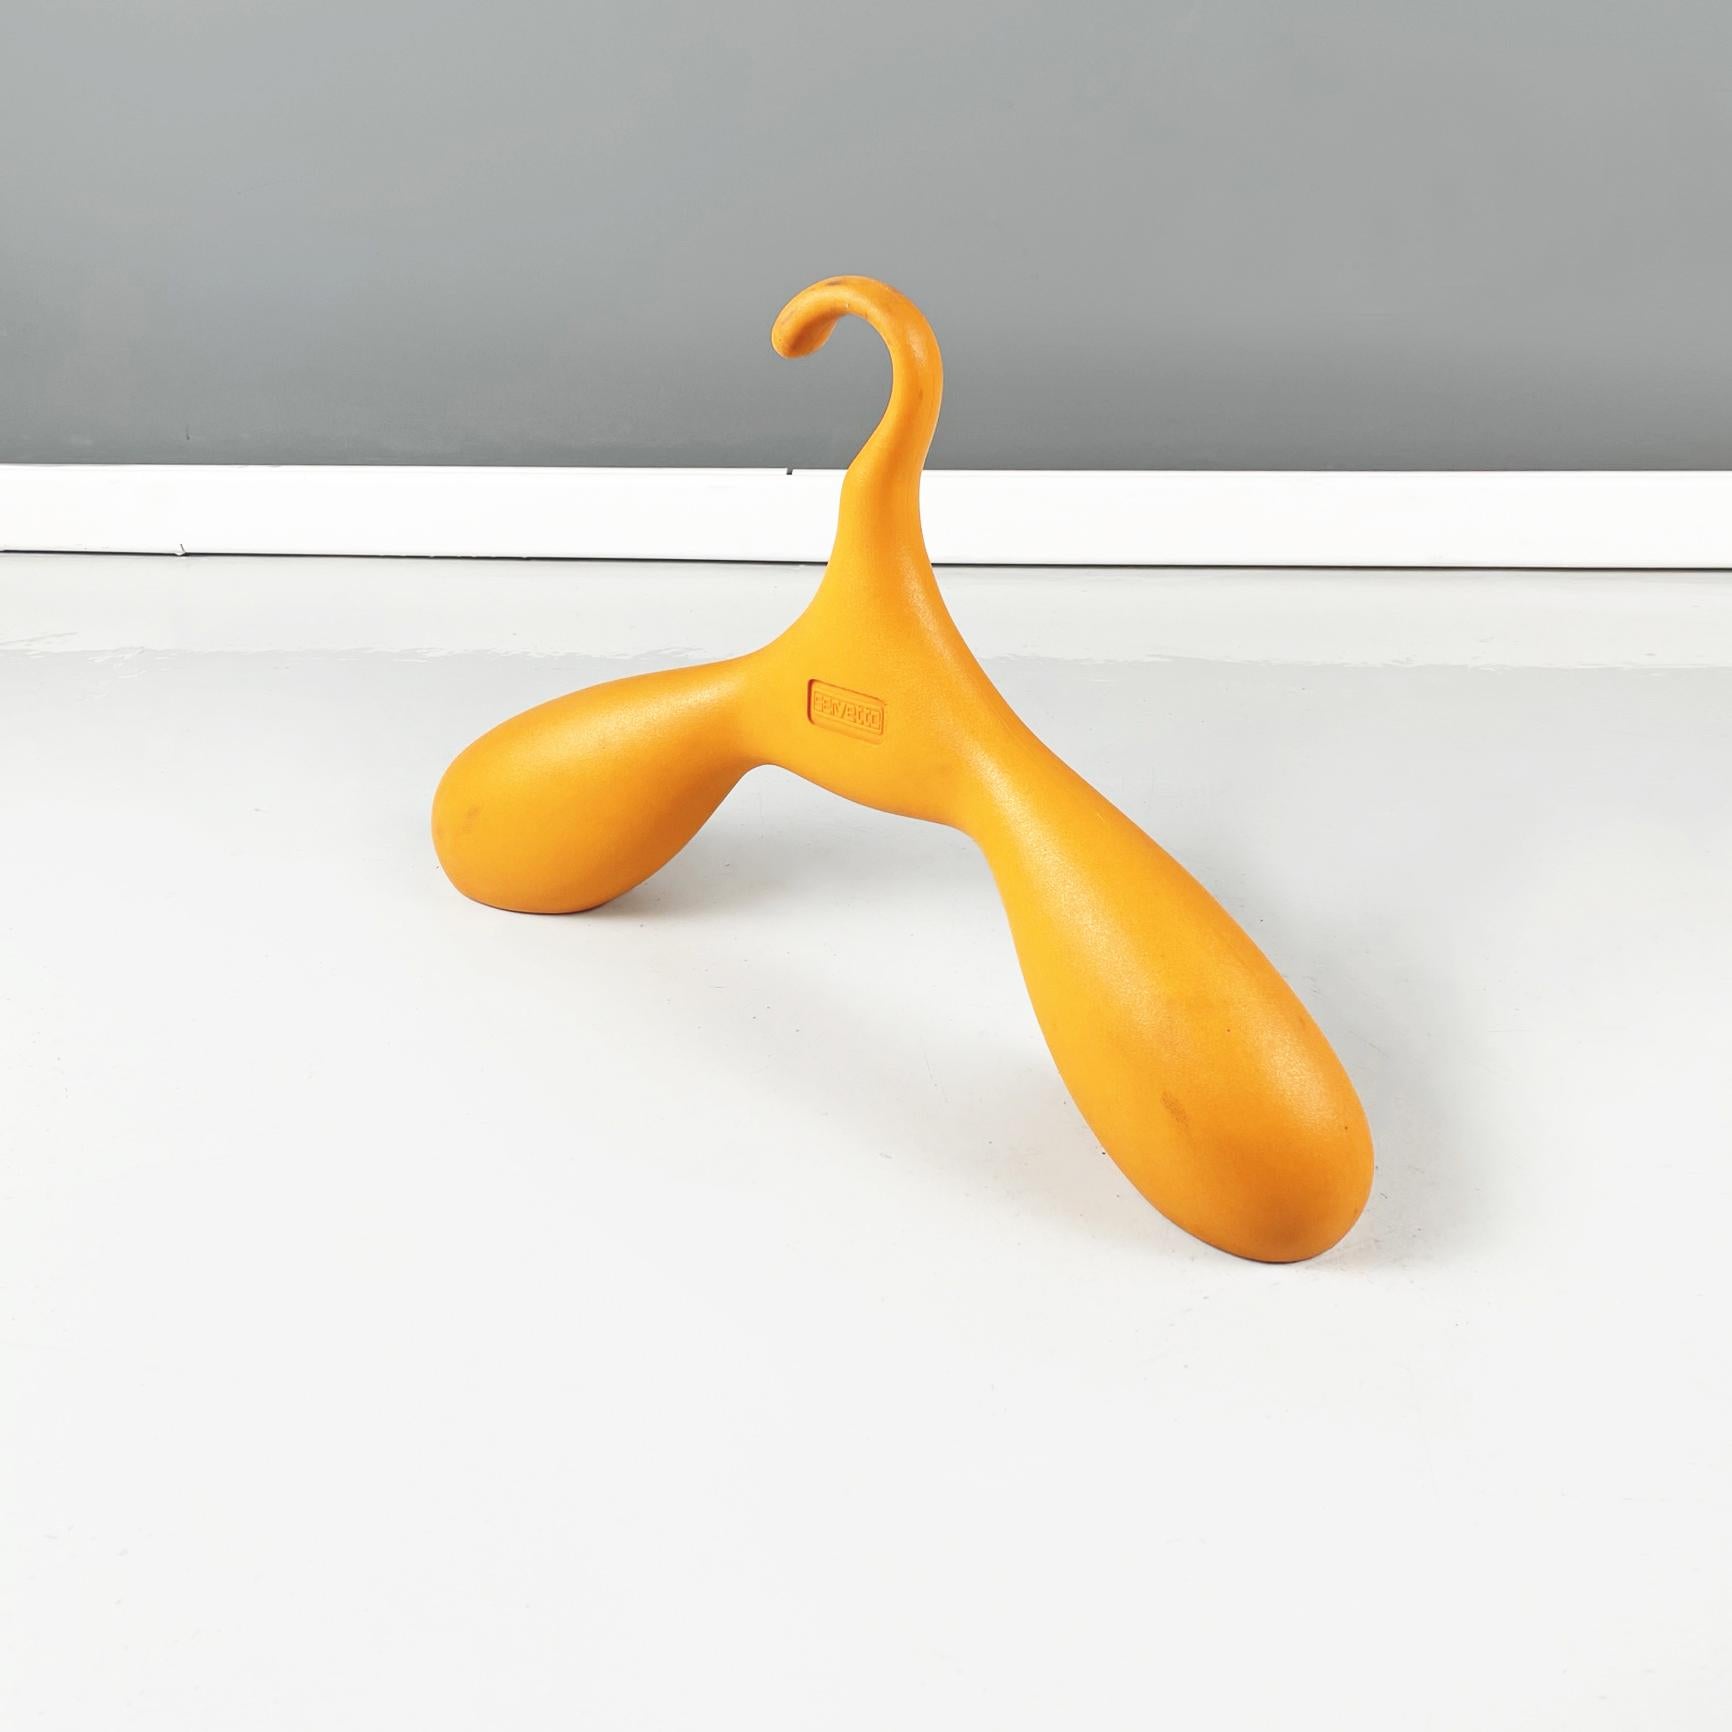 Italian modern Hanger mod. Dino by Alessandro Elli and Carlo Ballabio for Servetto, 1990s
Wall hanger mod. Dino in soft and textured polyurethane foam in bright orange. The hanger was made to be hung inside a wardrobe or even placed on the ground.